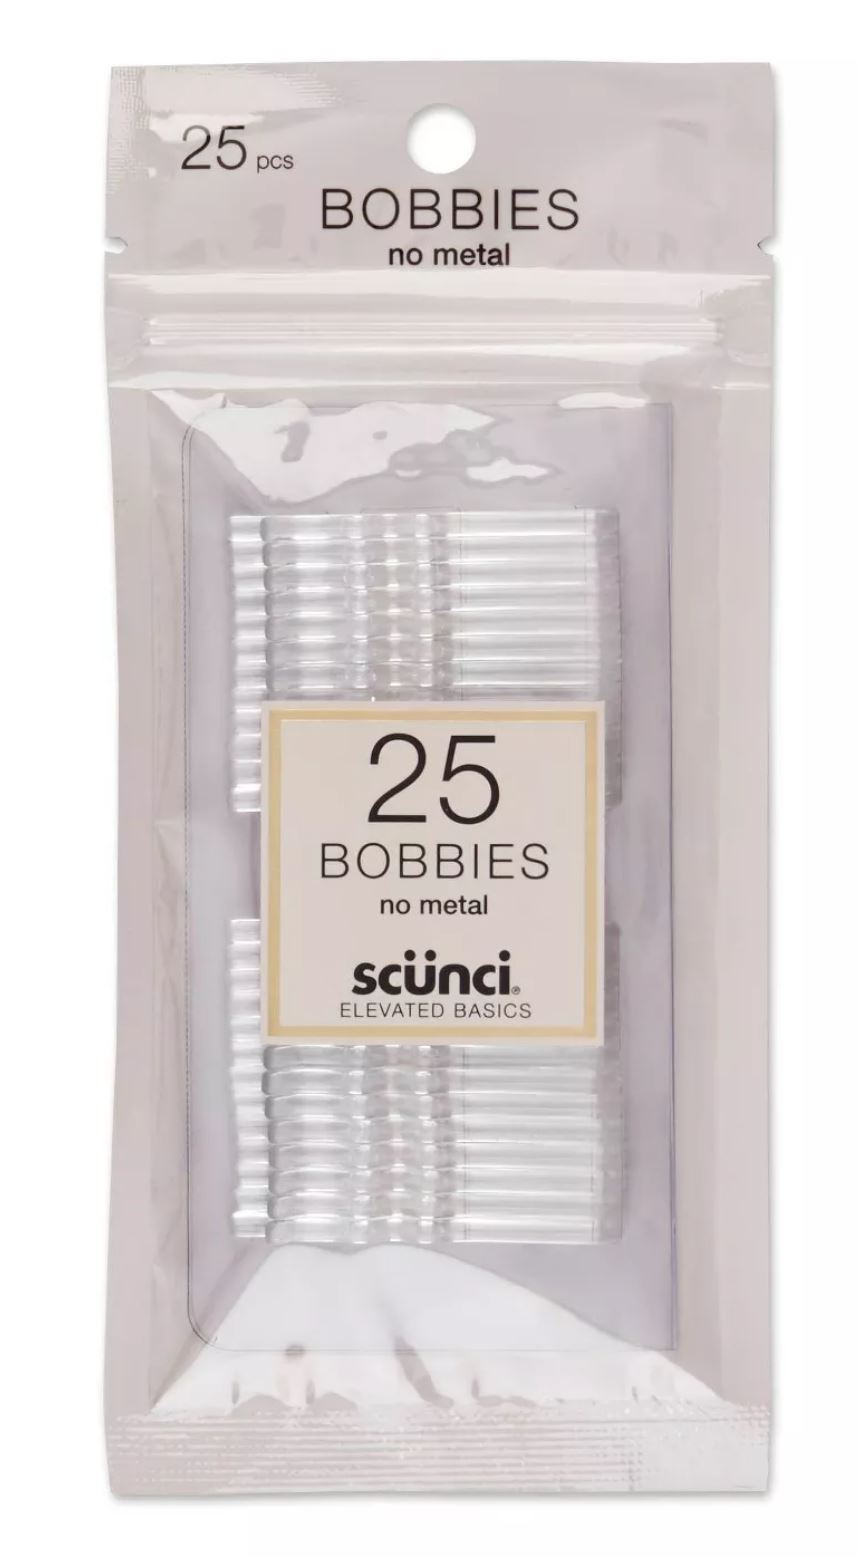 Scunci Clear No Metal Elevated Basics Bobby pins - 25ct